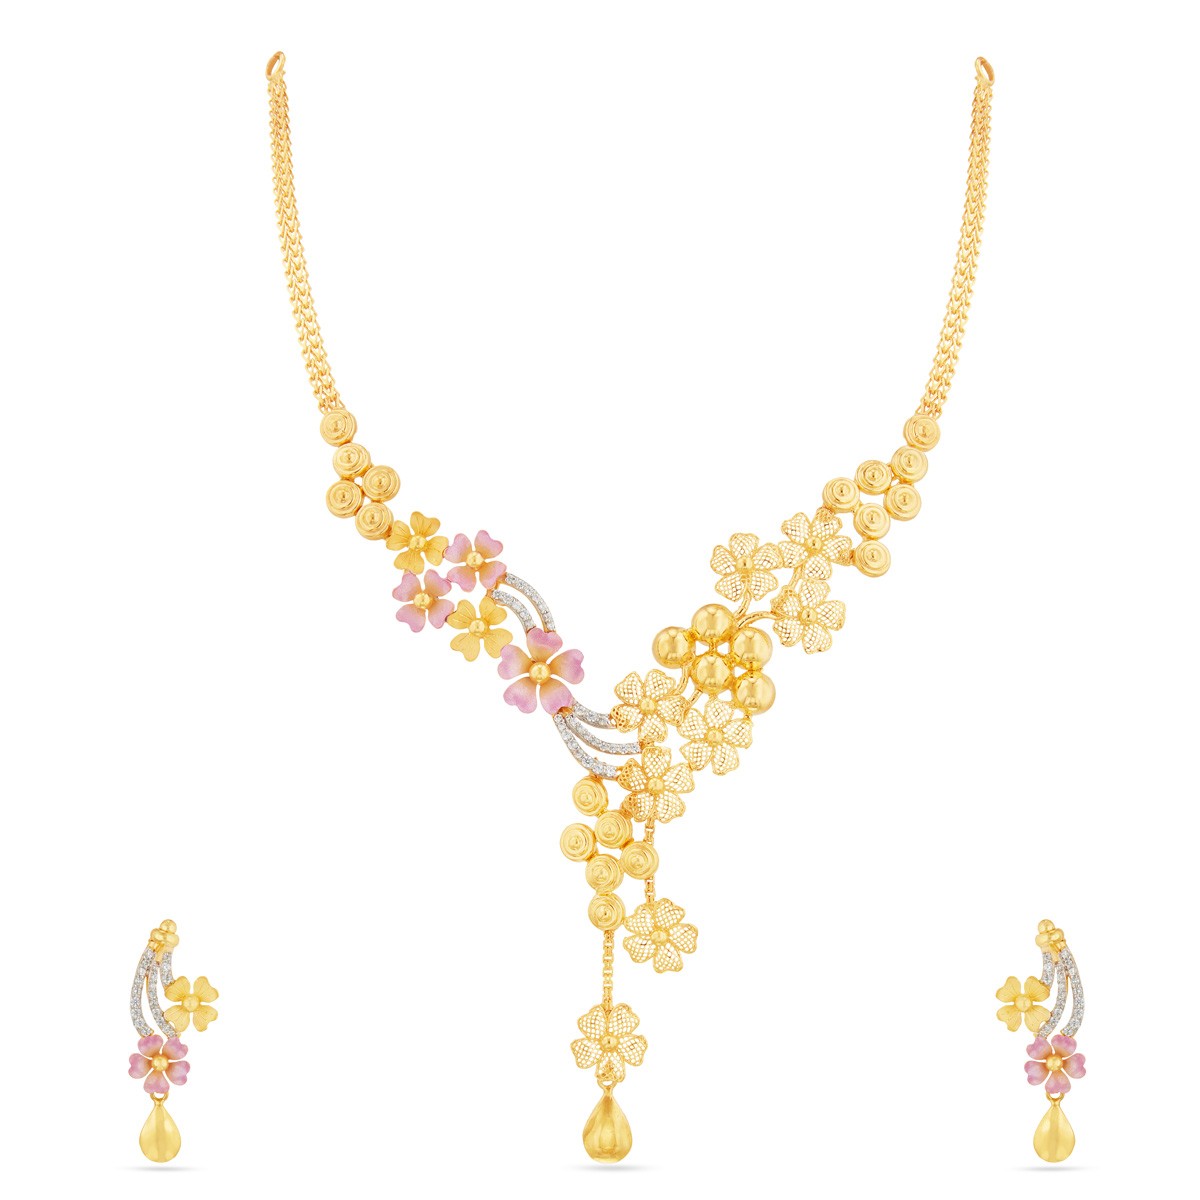 Light Weight Gold Necklace Designs With Price In Rupees South India Jewels,Necklace Premier Designs Jewelry Mark